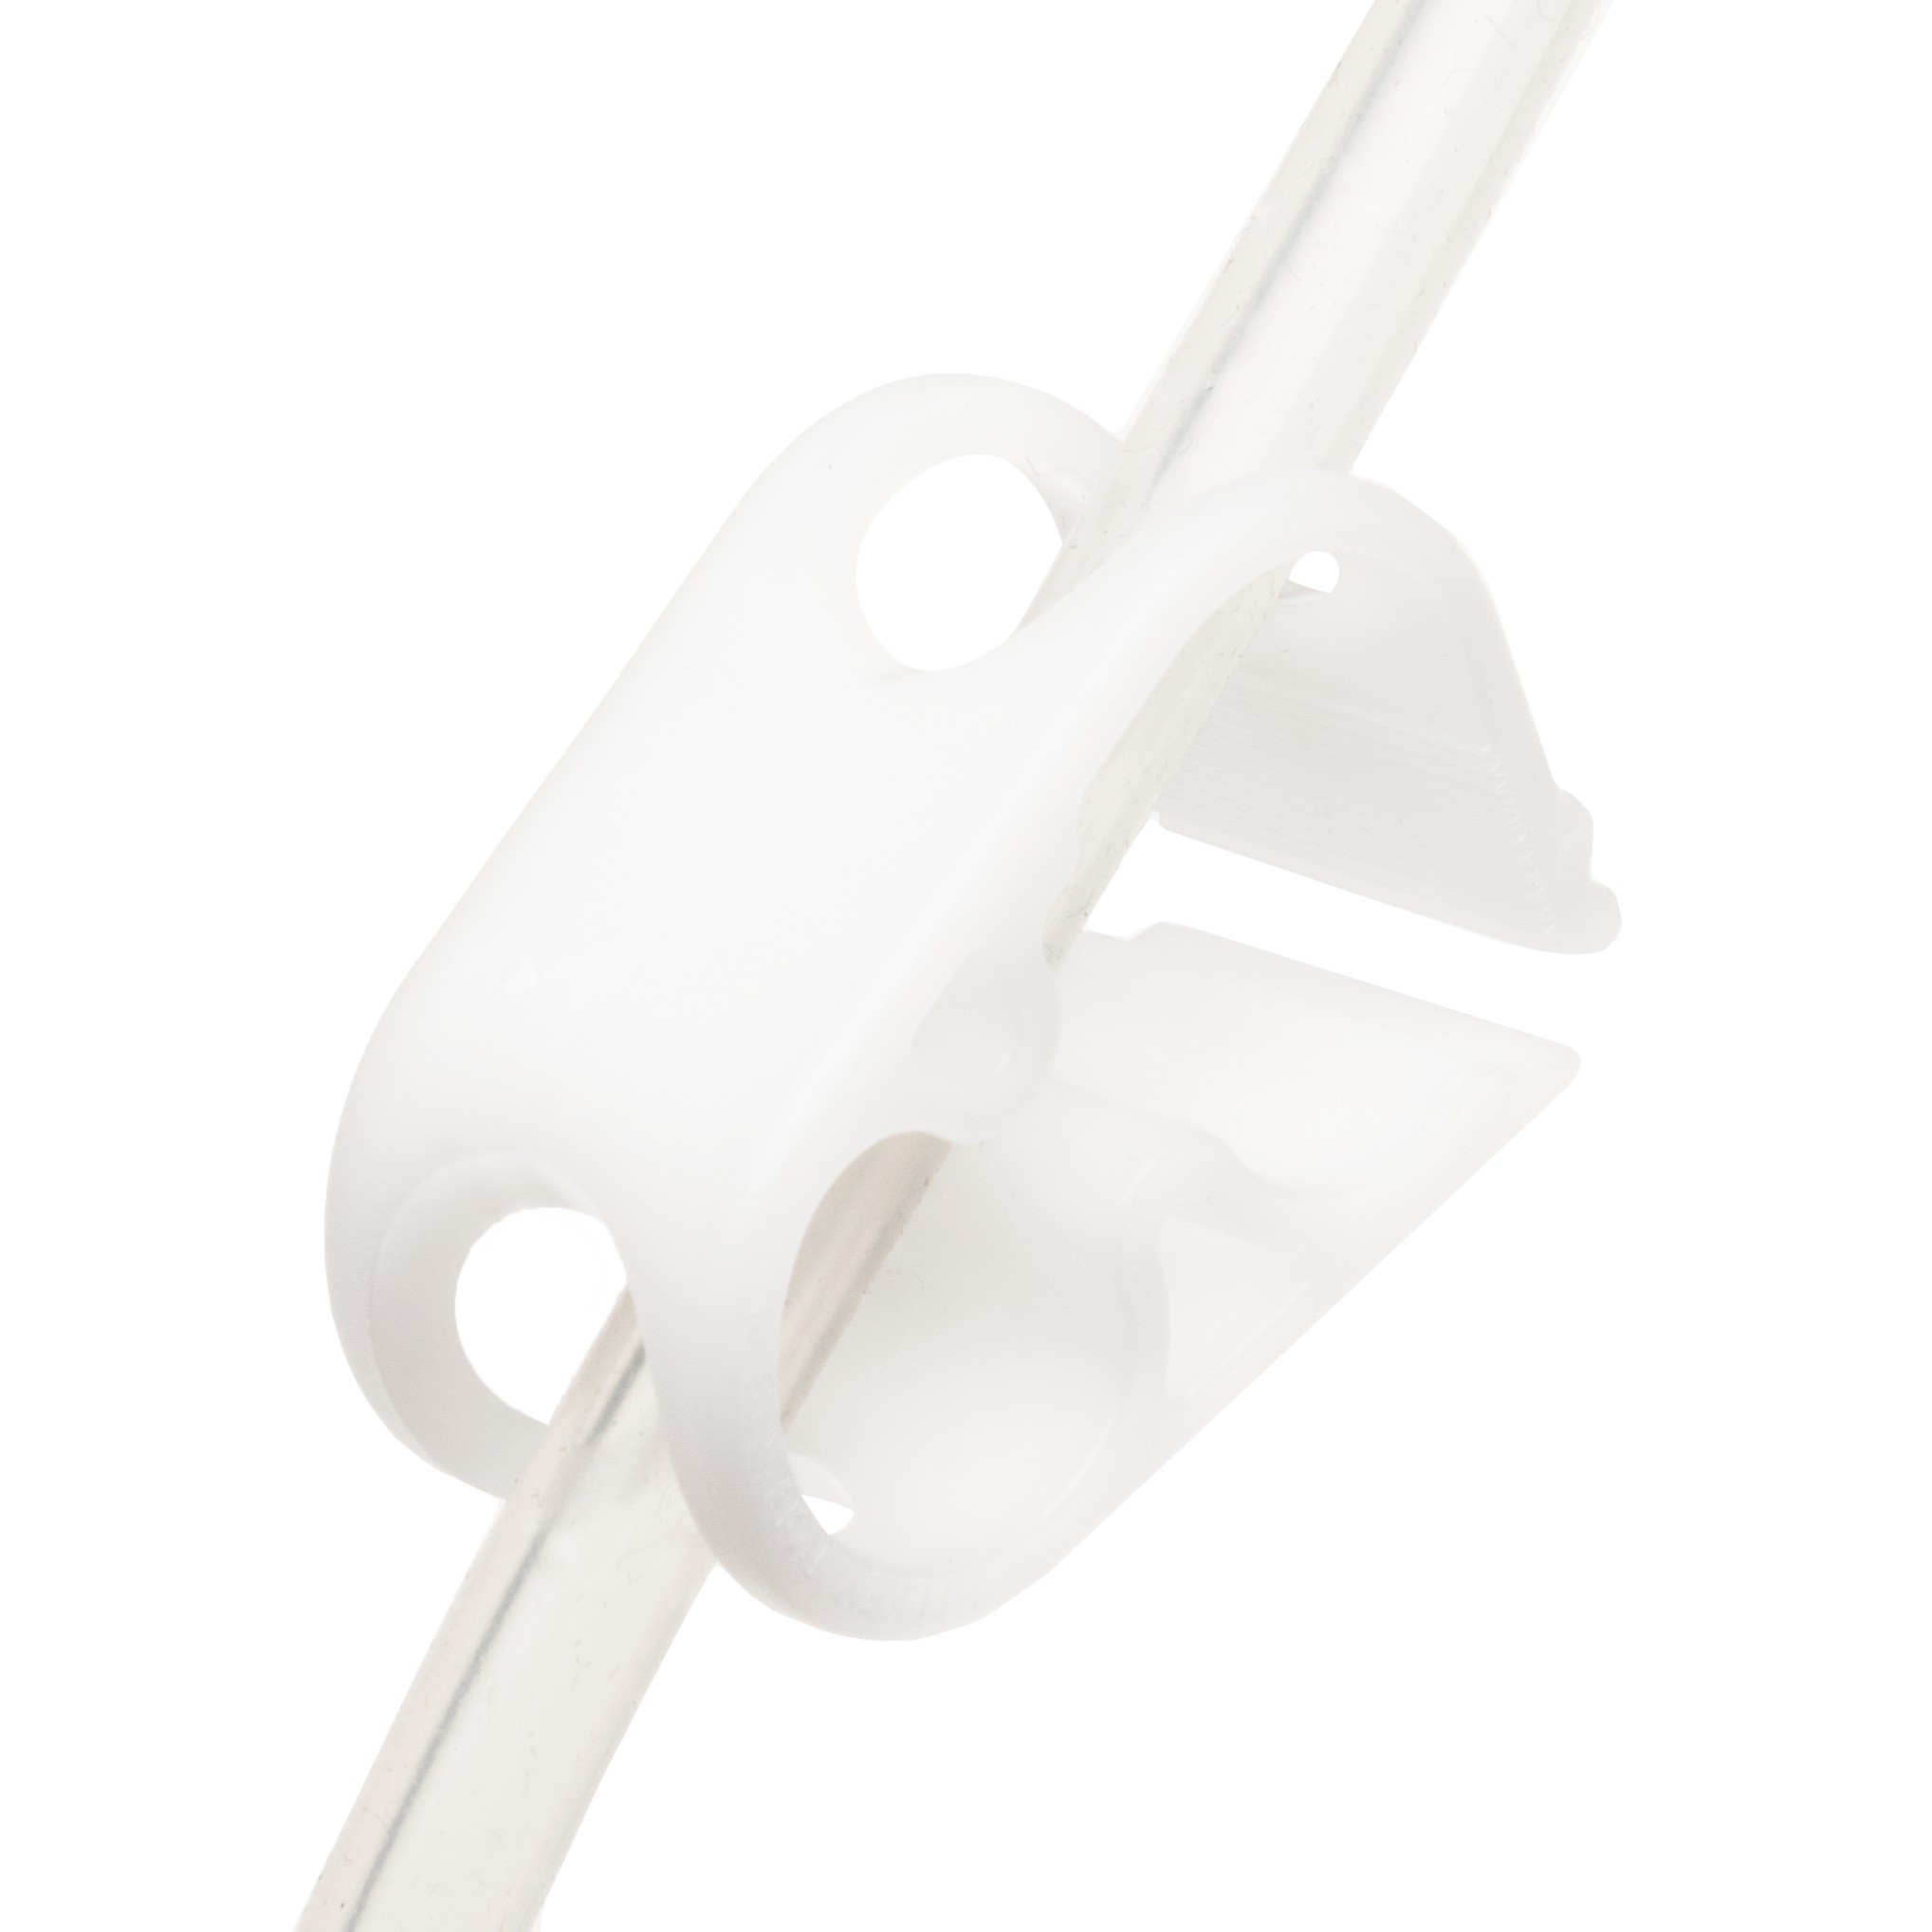 SP Bel-Art Acetal Mid-Range Plastic Tubing Clamps; For ⅛ to ⁷⁄₁₆ in. O.D. Tubing (Pack of 12)